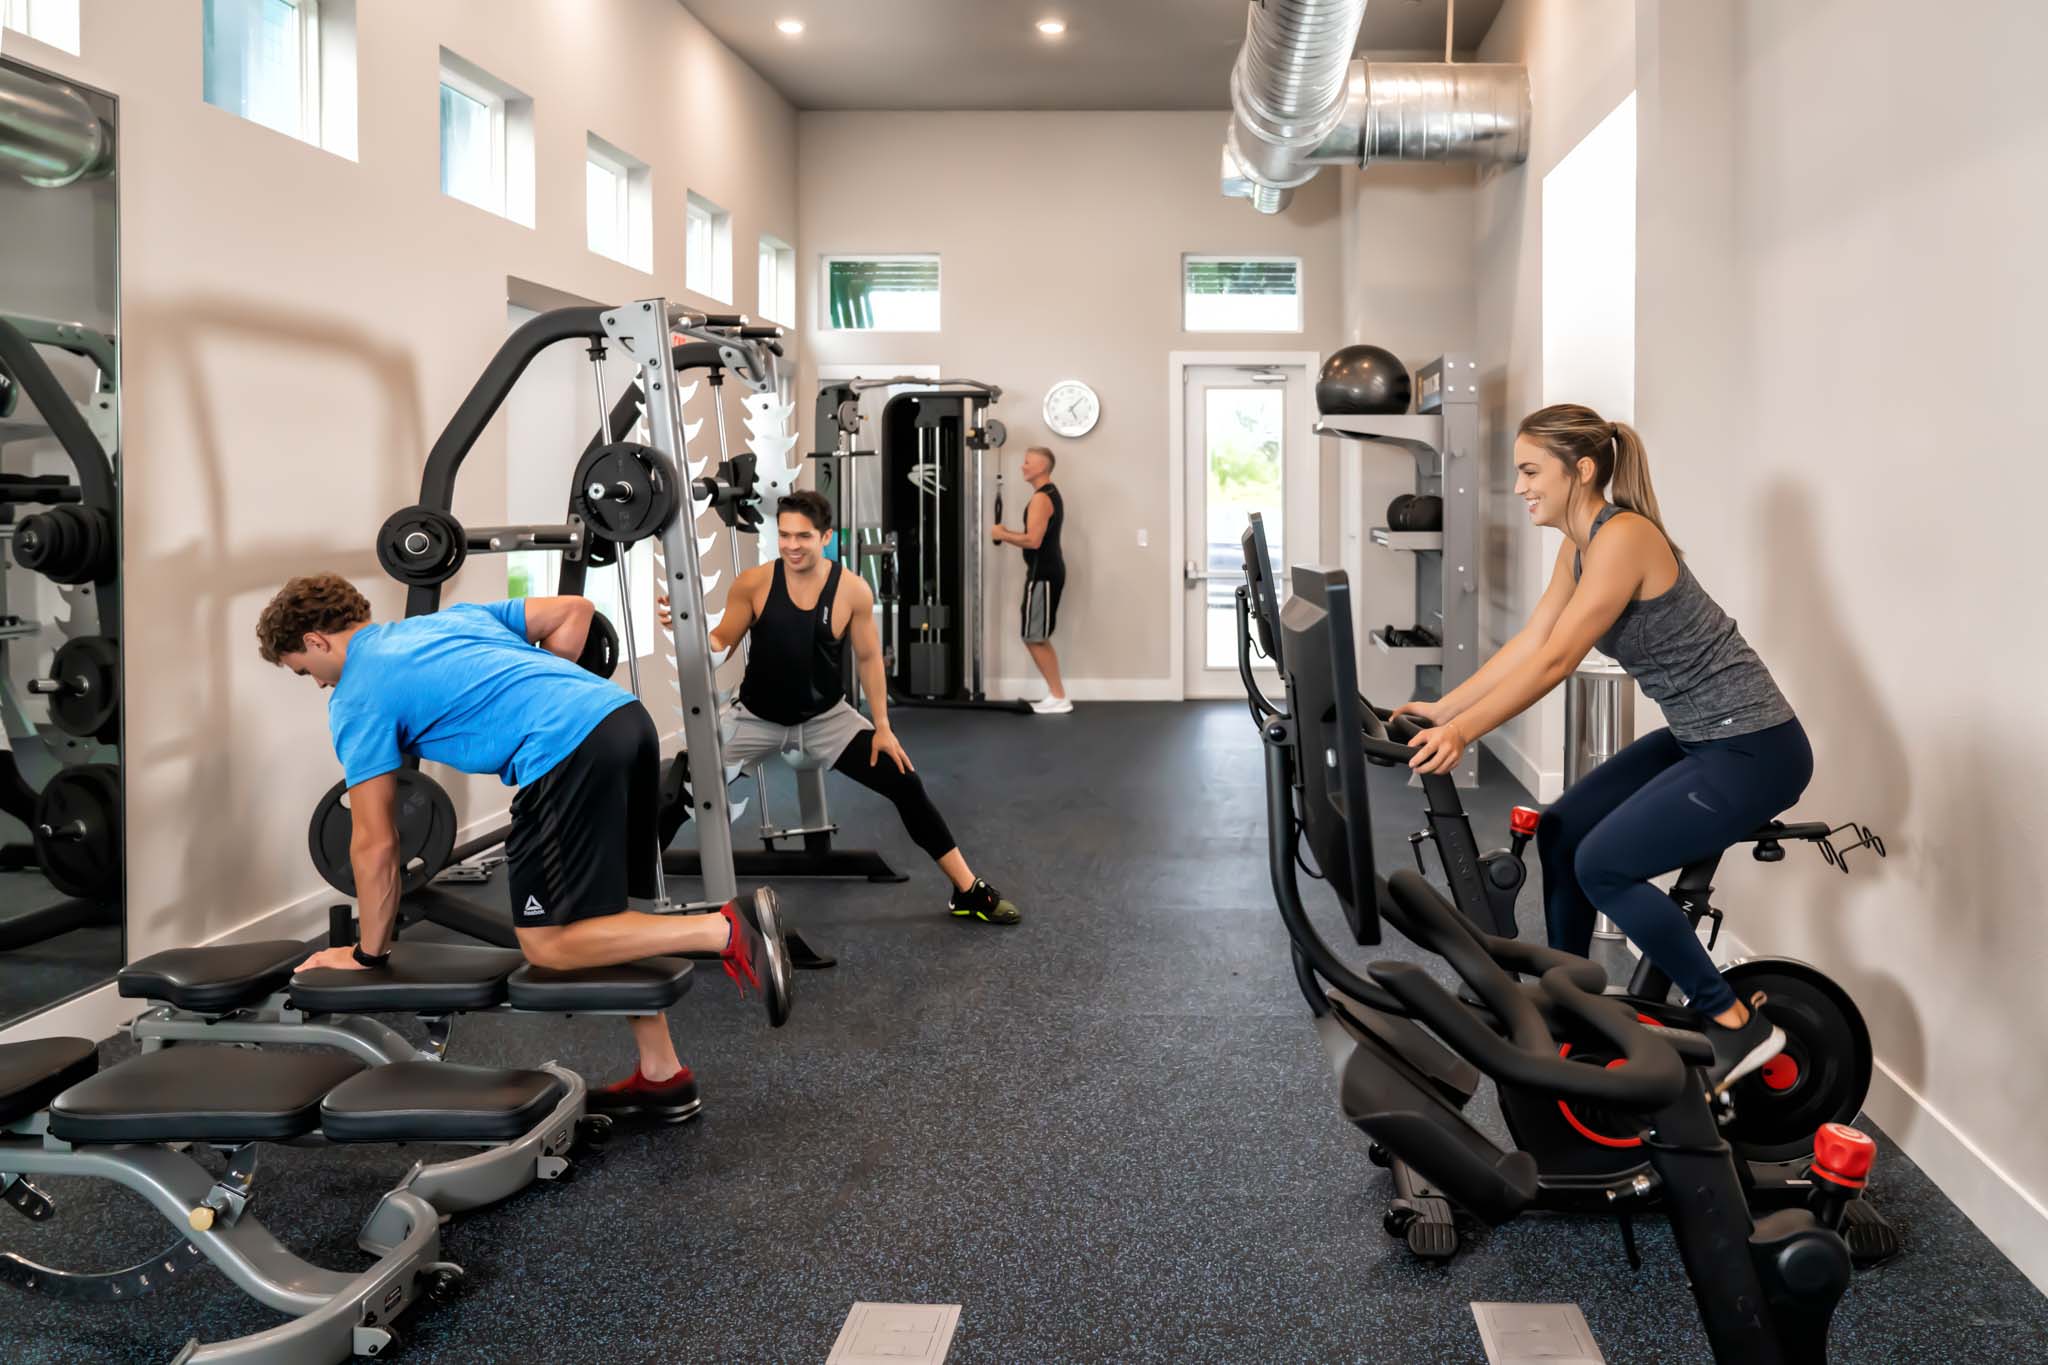 People working out on exercise equipment and bikes in the Eagle Trace clubhouse fitness center.